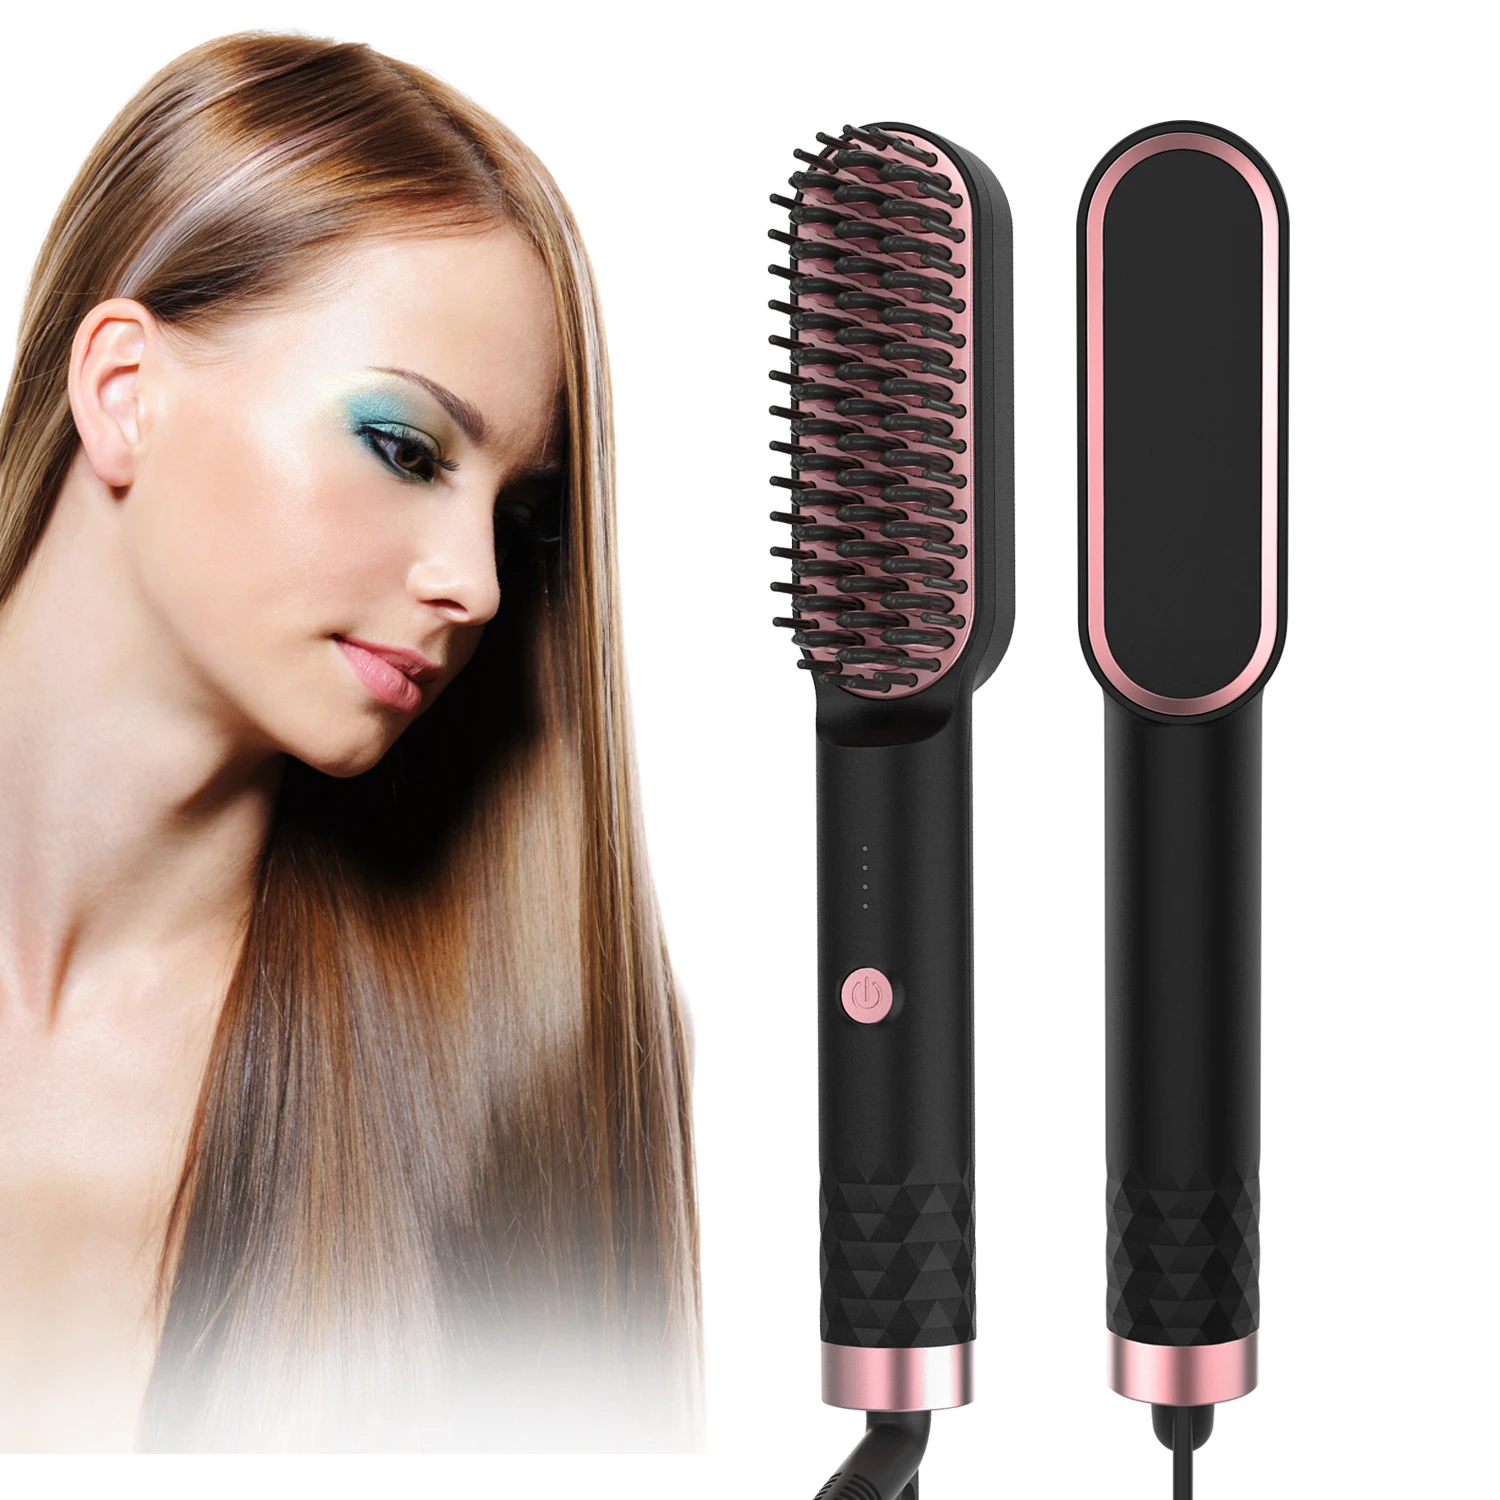 

Straightening Hot Comb Anti-Scald Heated Combs Straightener Brush Ionic Enhanced Straightening Brush Hot Comb Hair Iron Styler